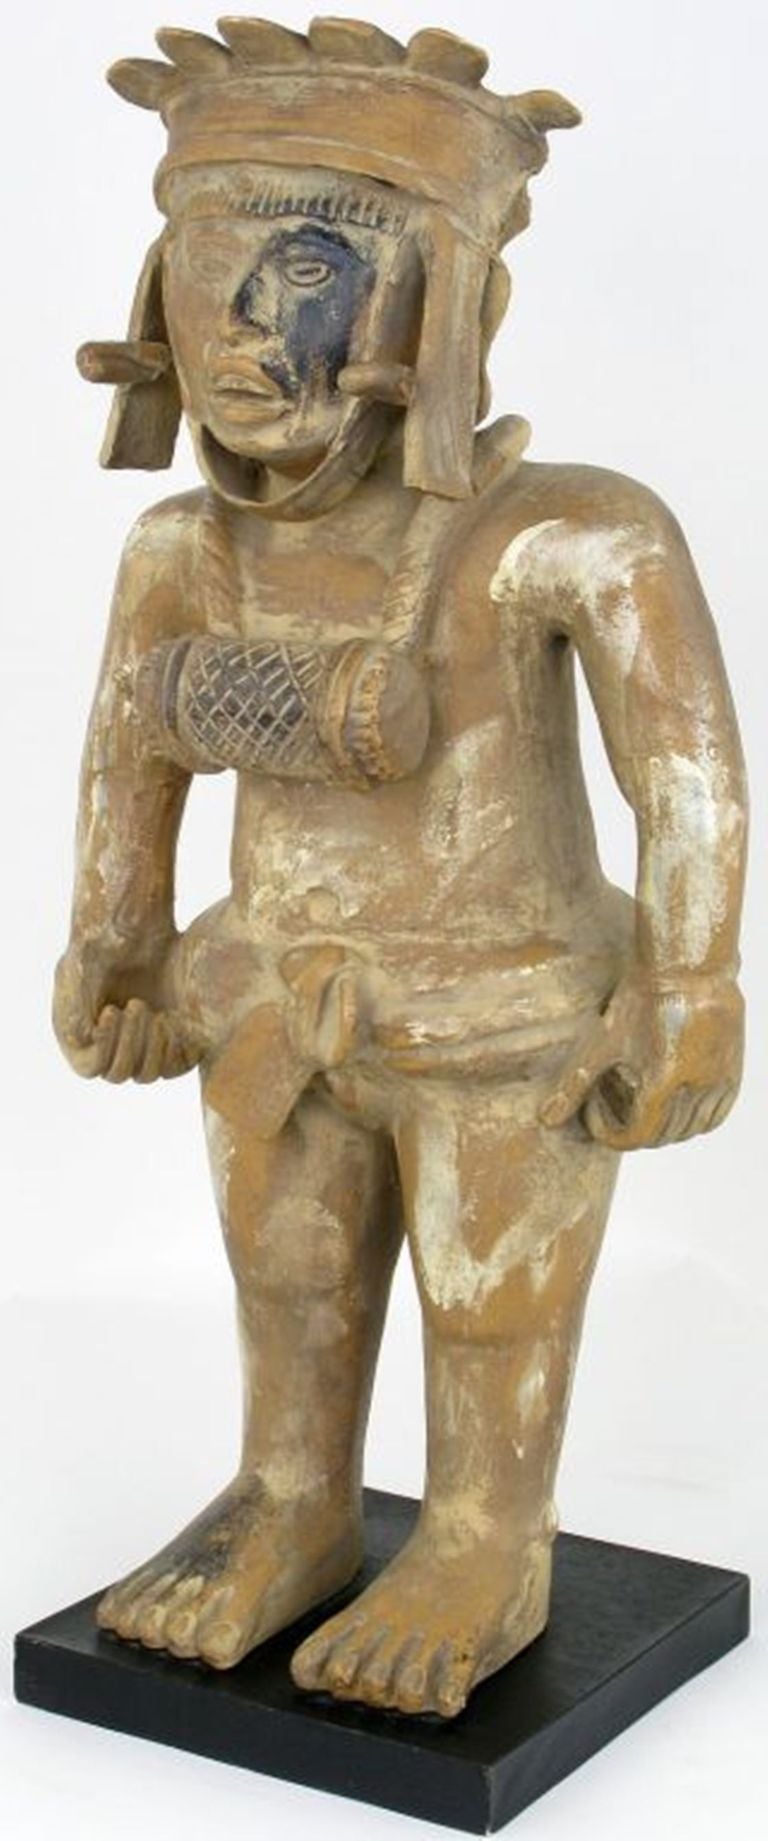 Excellent pre-Columbian style glazed terracotta statue of a Mayan figure on glazed ceramic base.